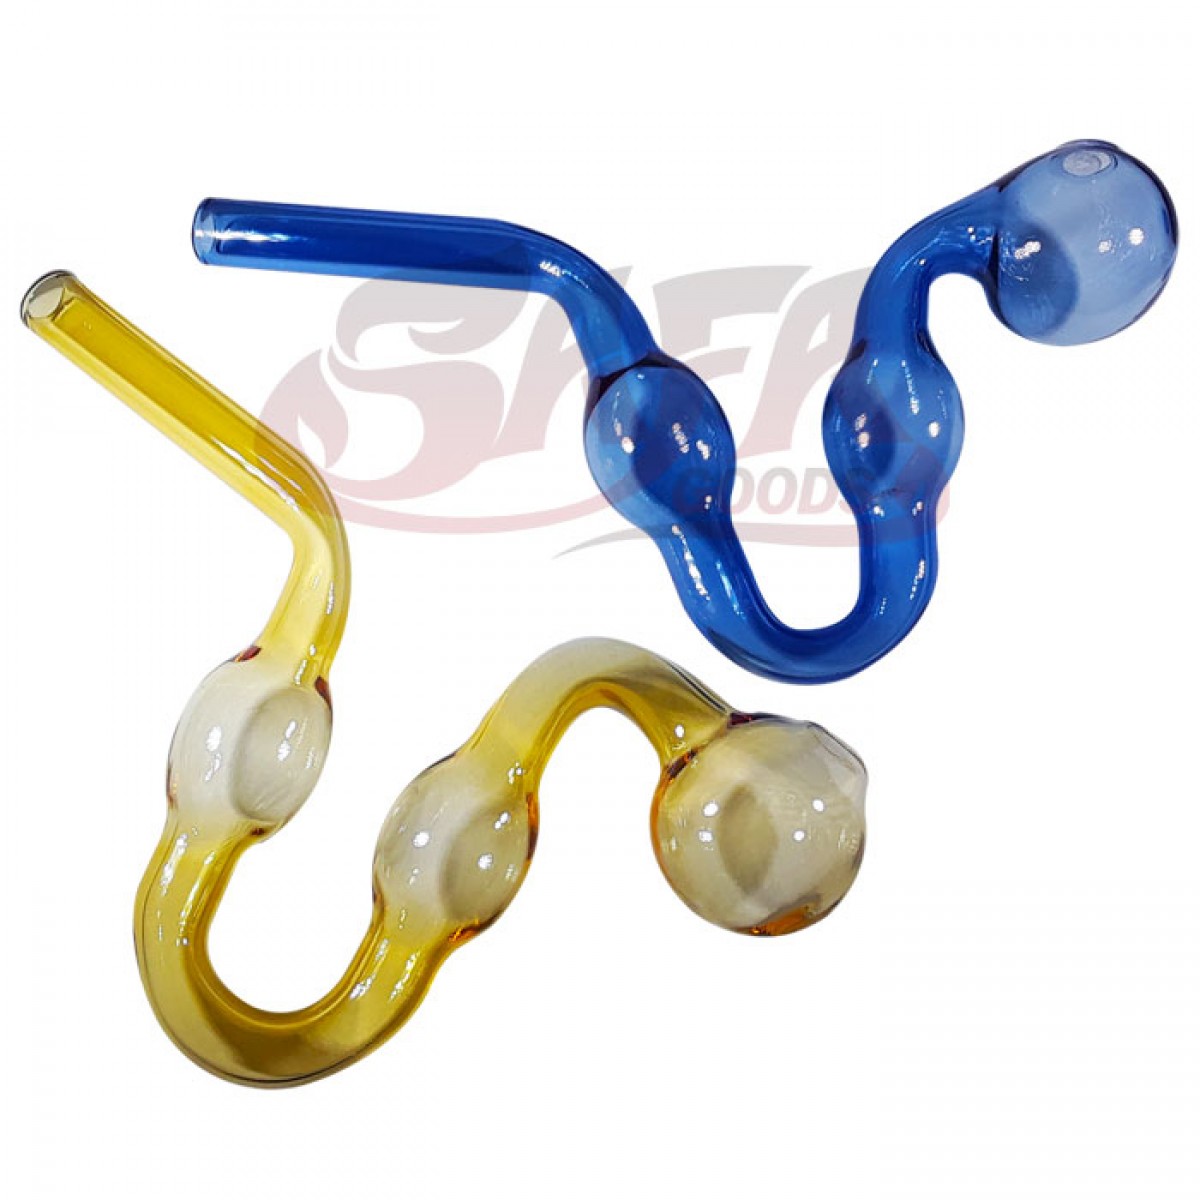 5.5 Inch Curved Oil Burners 5PC